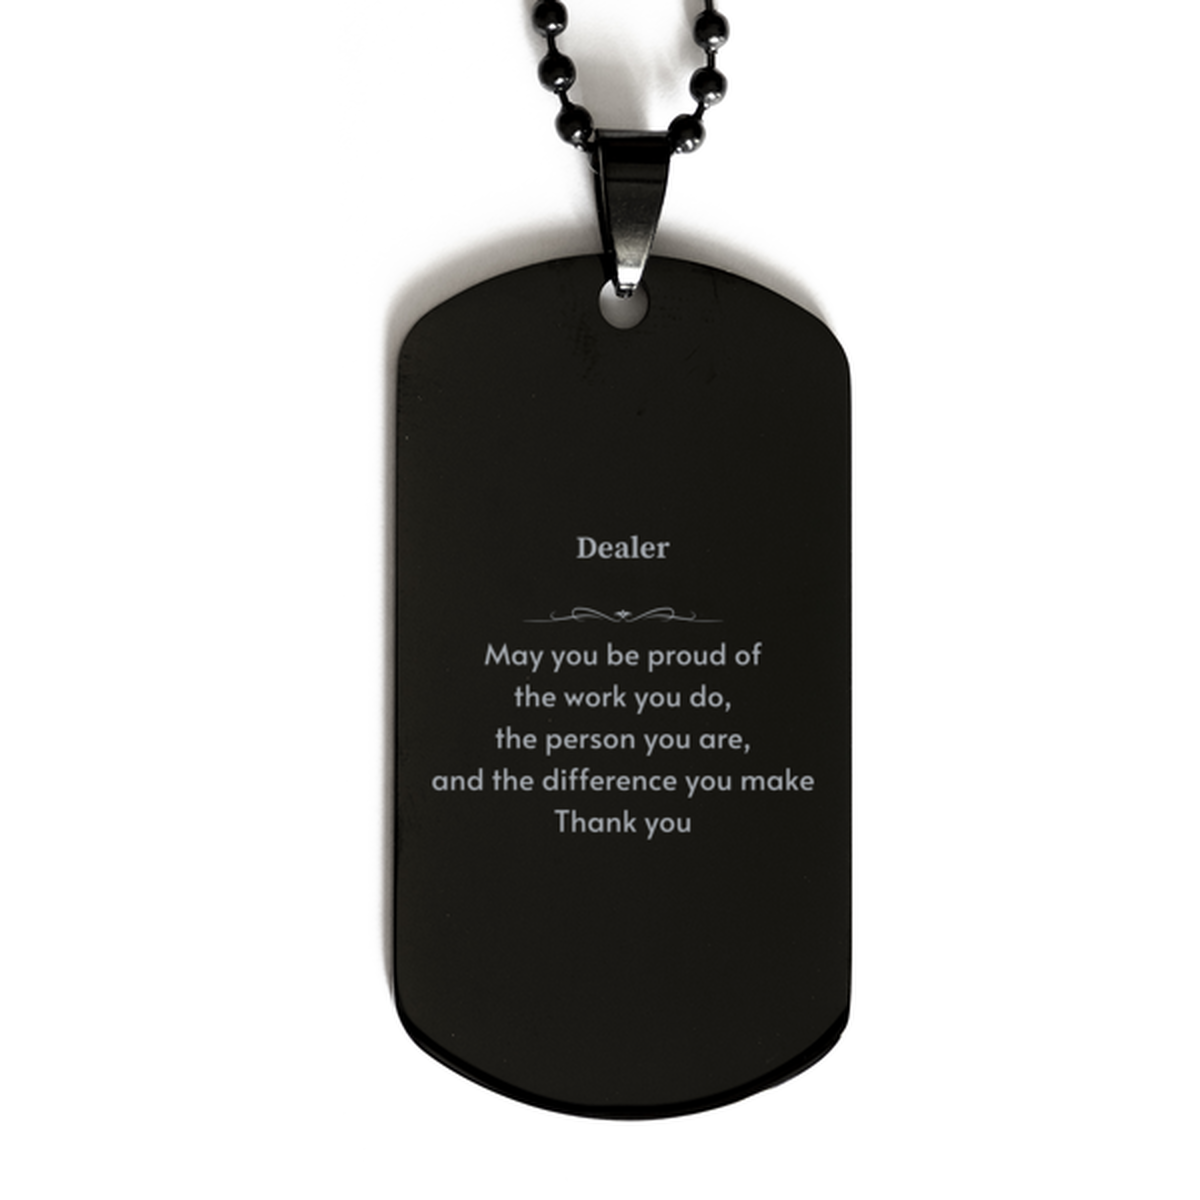 Heartwarming Black Dog Tag Retirement Coworkers Gifts for Dealer, Dealer May You be proud of the work you do, the person you are Gifts for Boss Men Women Friends